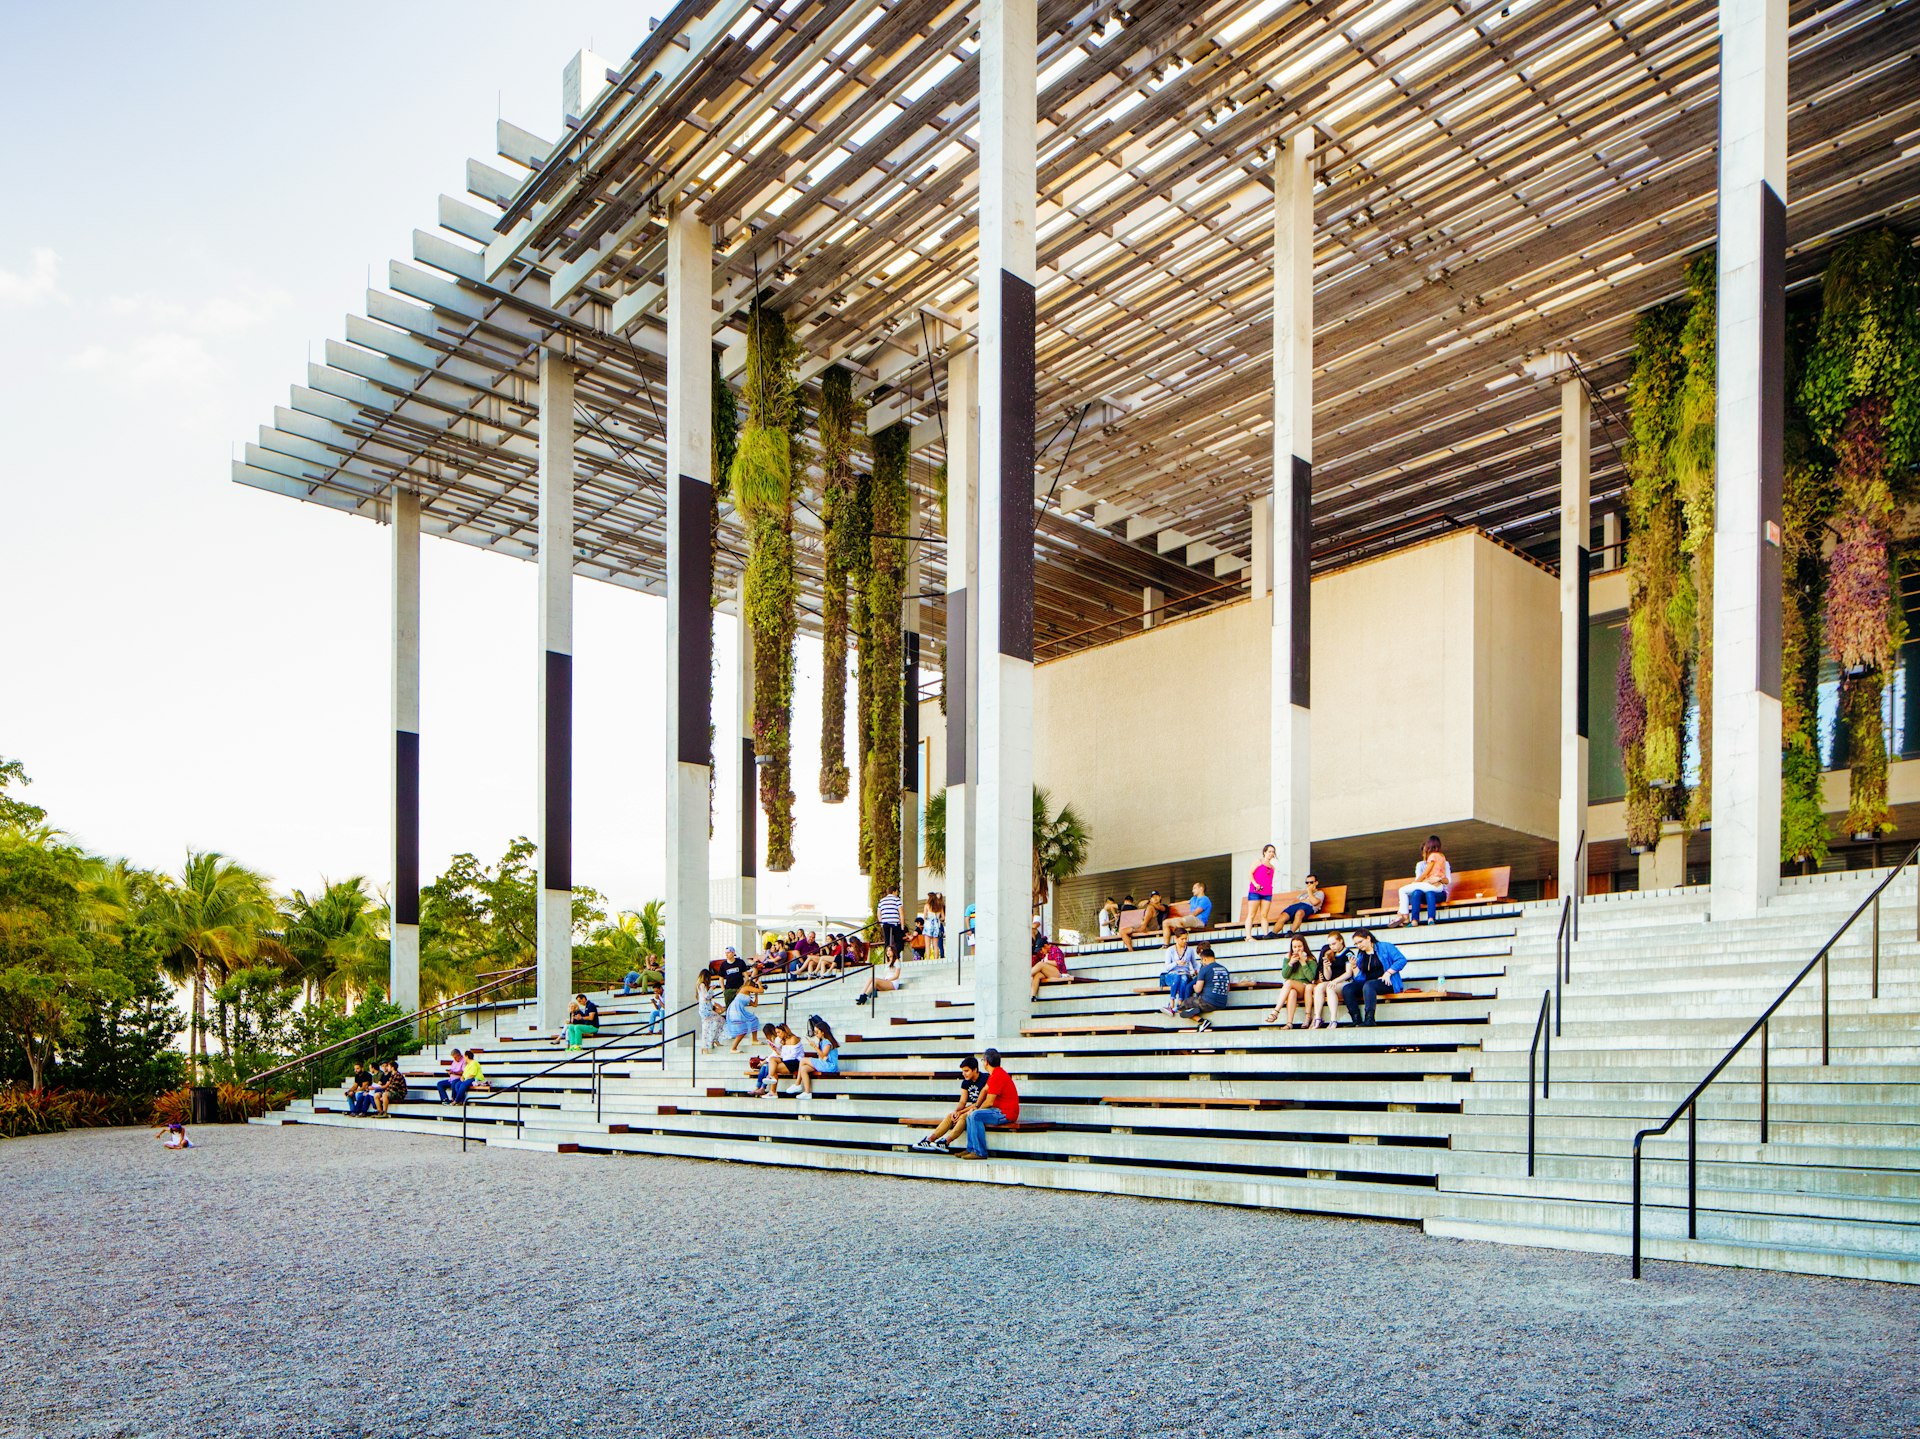 People are sitting on or walking up the stairs of the Pérez Art Museum in Miami